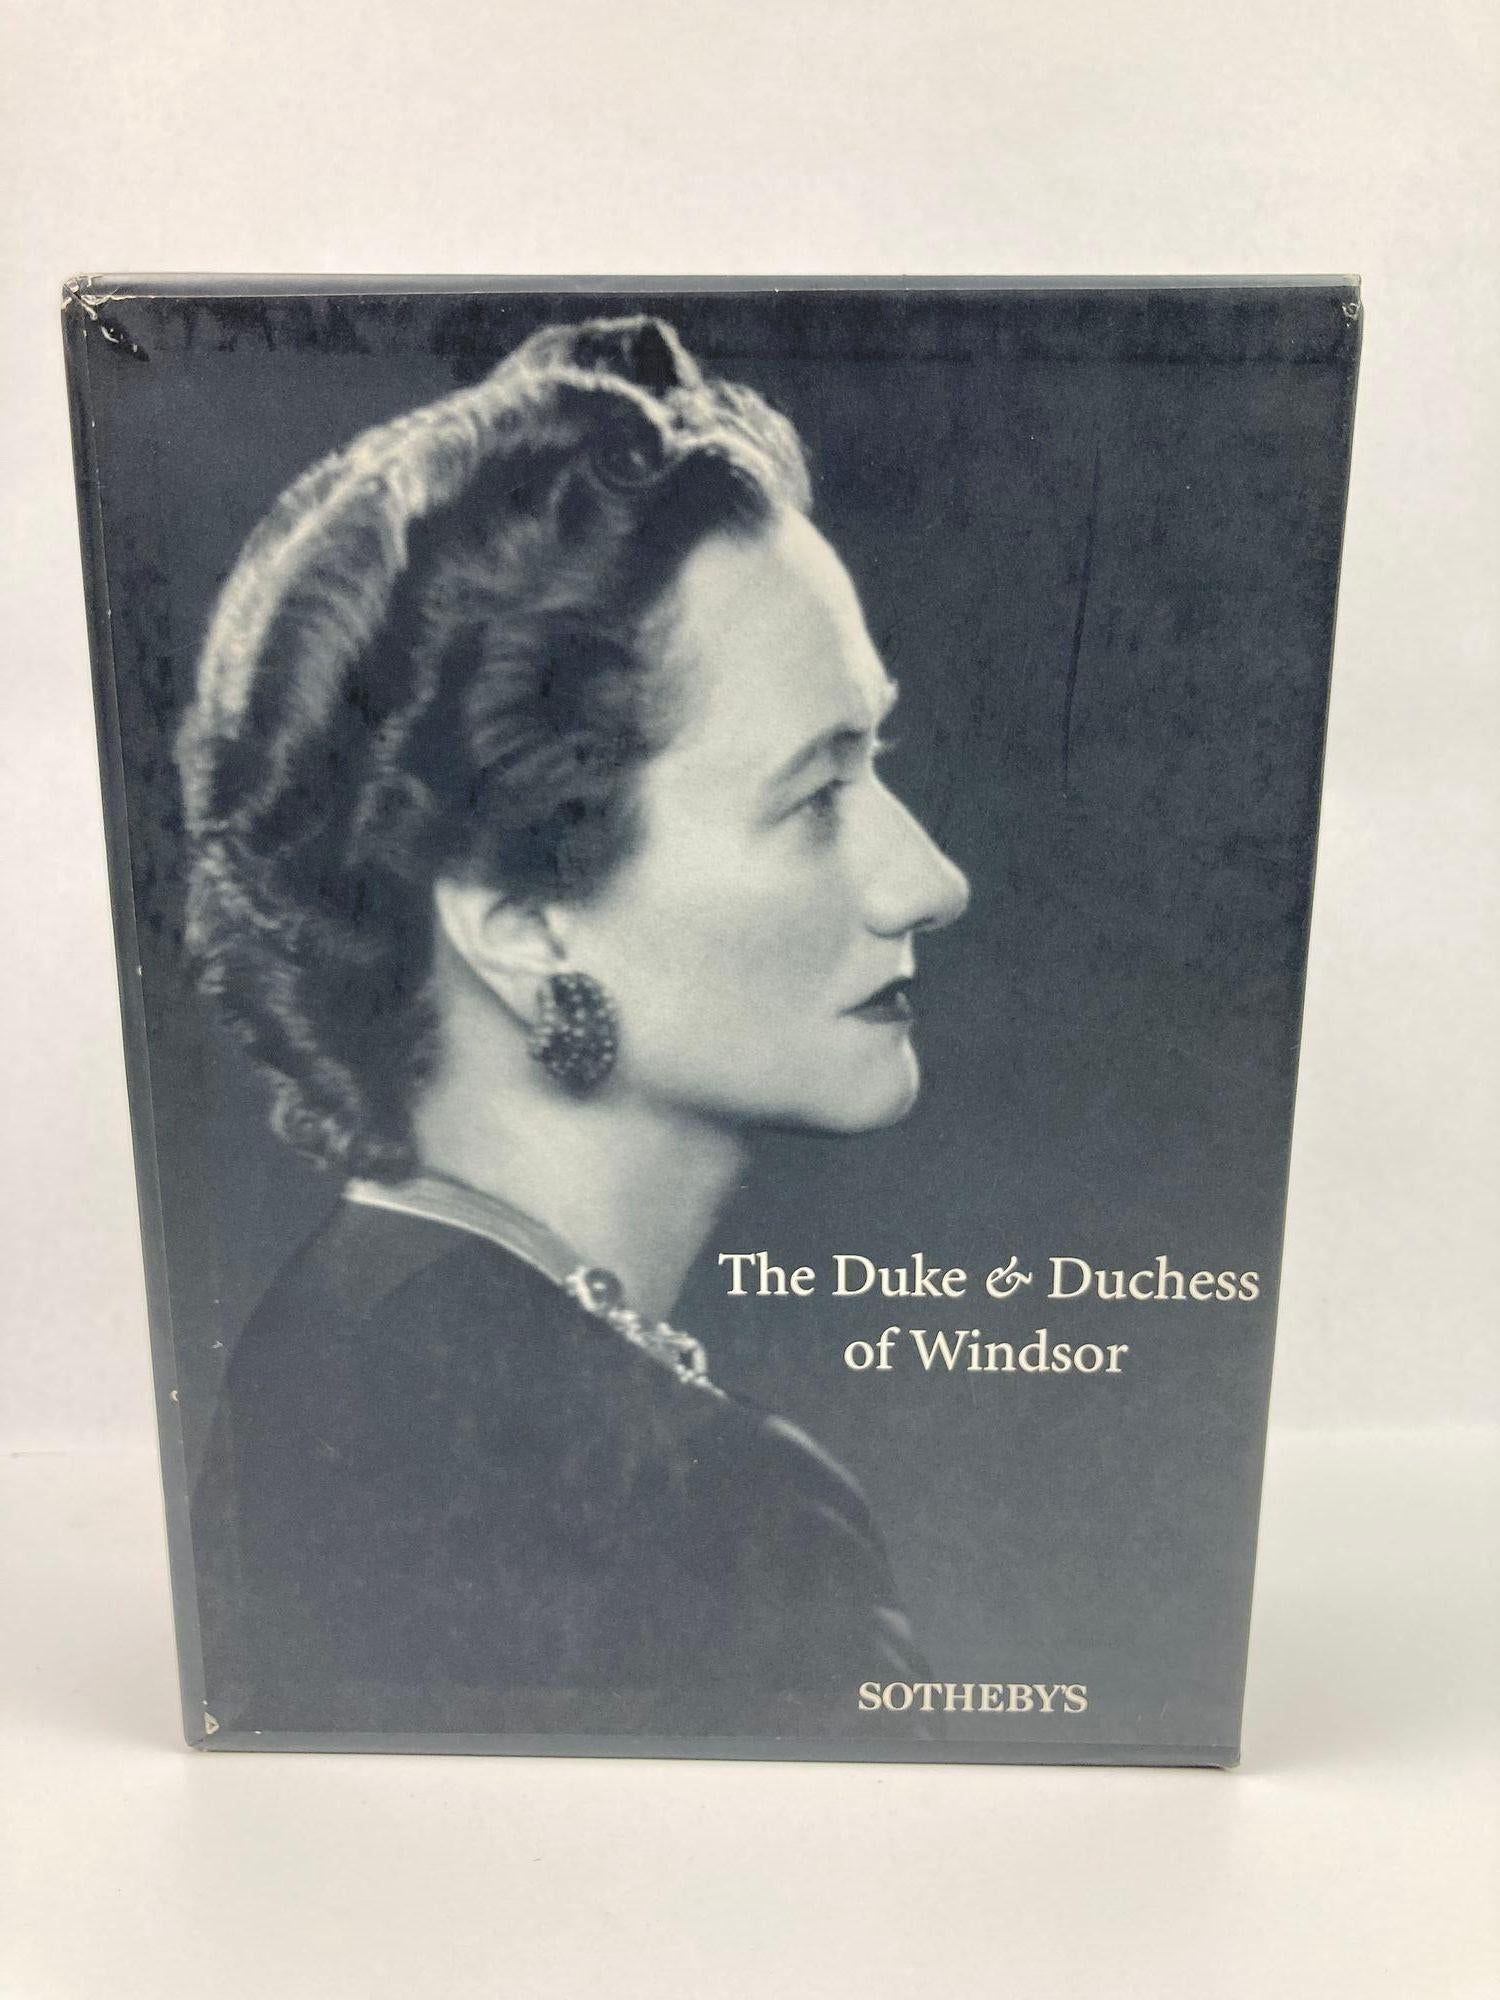 duchess of windsor jewelry auction 1987 catalogue